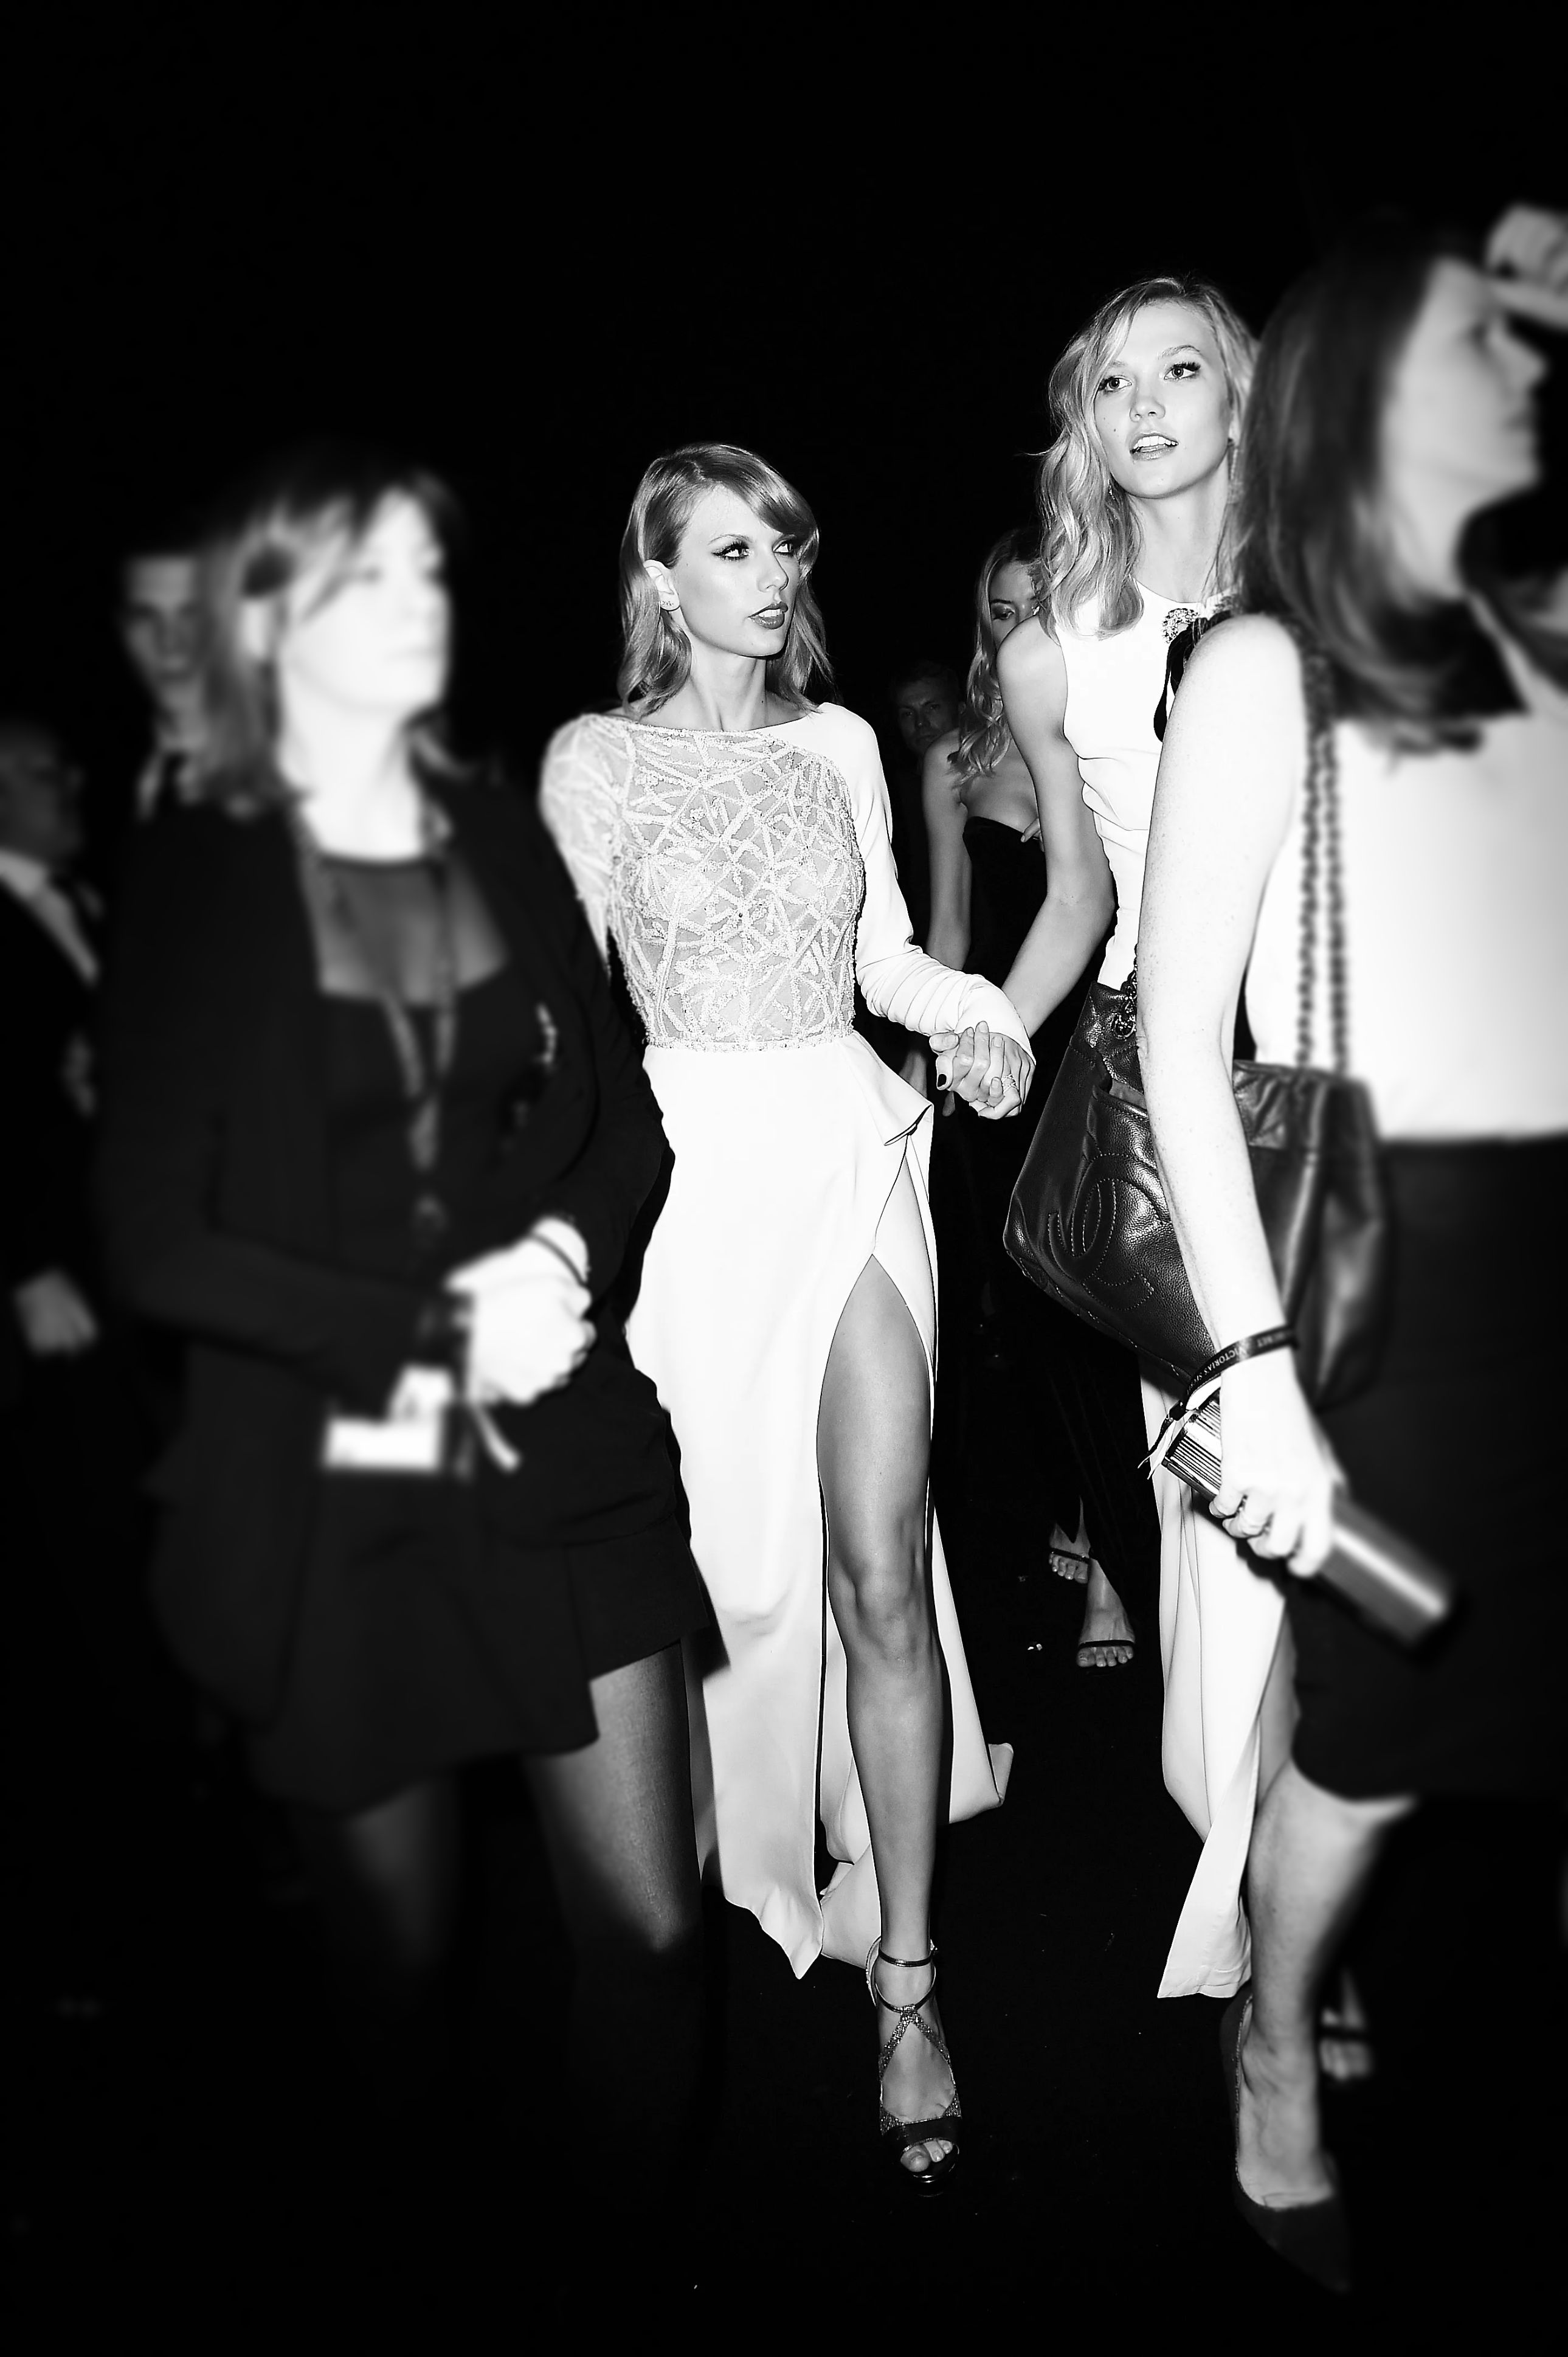 Taylor Swift And Karlie Kloss Kaylor Romance Rumors Revisited Part 2